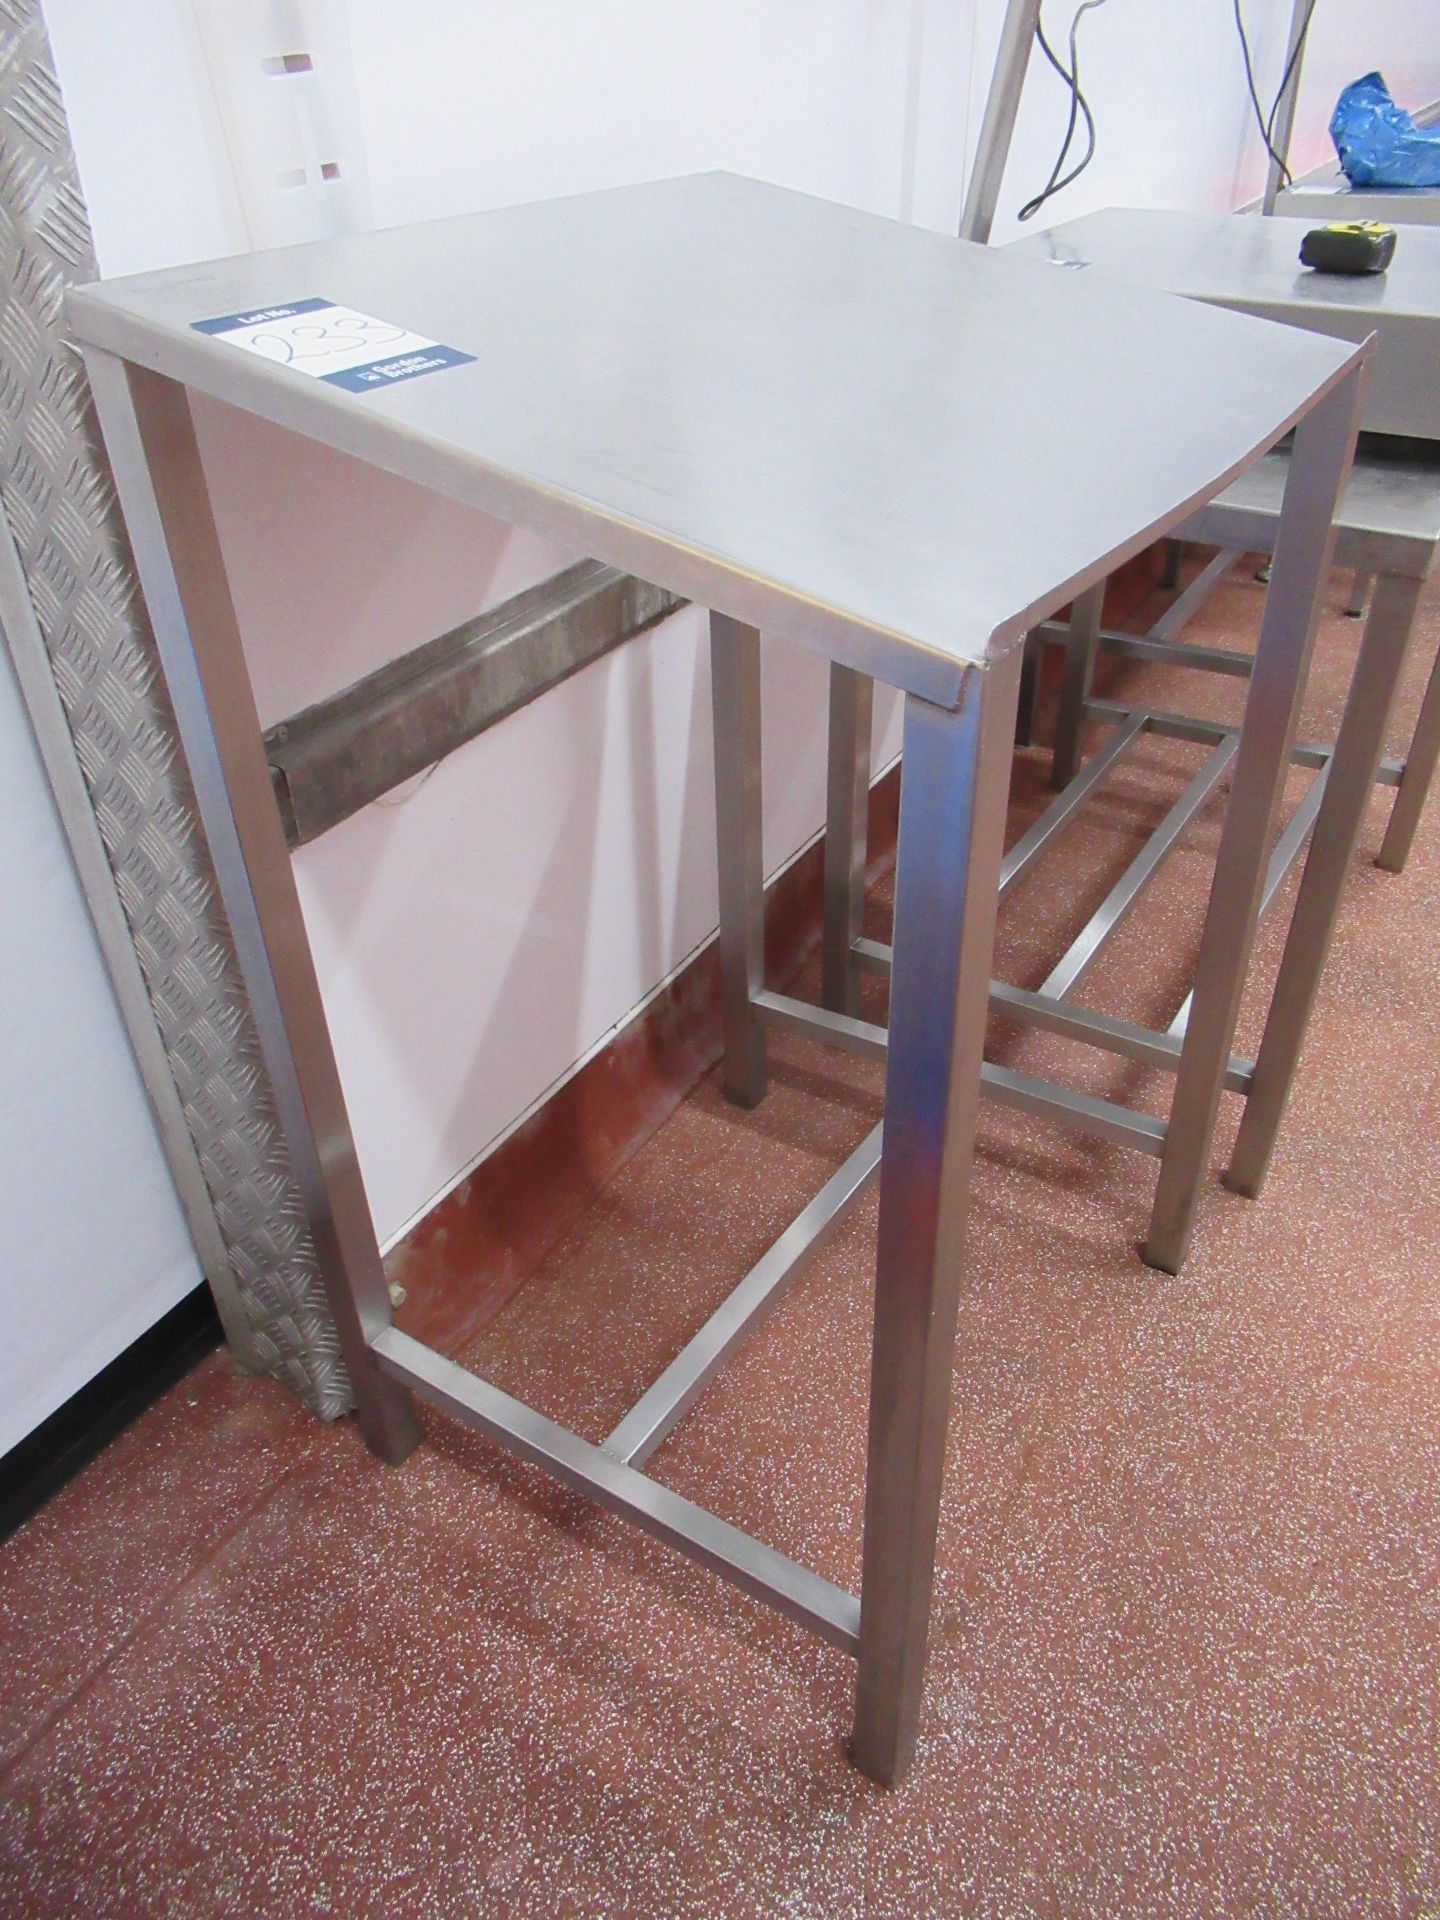 Teknomek Hygienox stainless steel desk 700 x 610 top and 1000mm height to top - Image 2 of 4